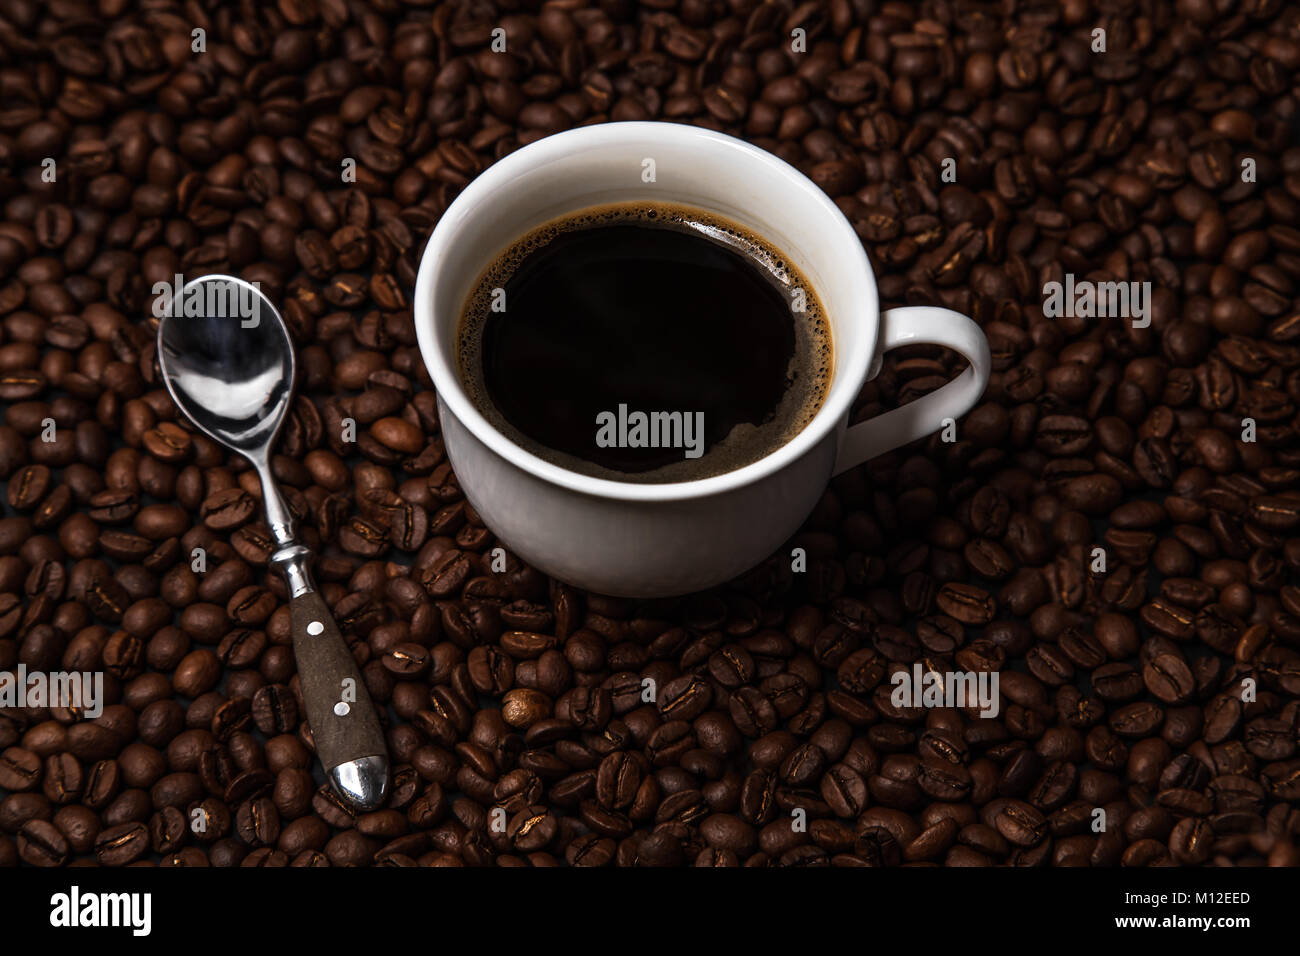 cup of coffee on coffee beans Stock Photo